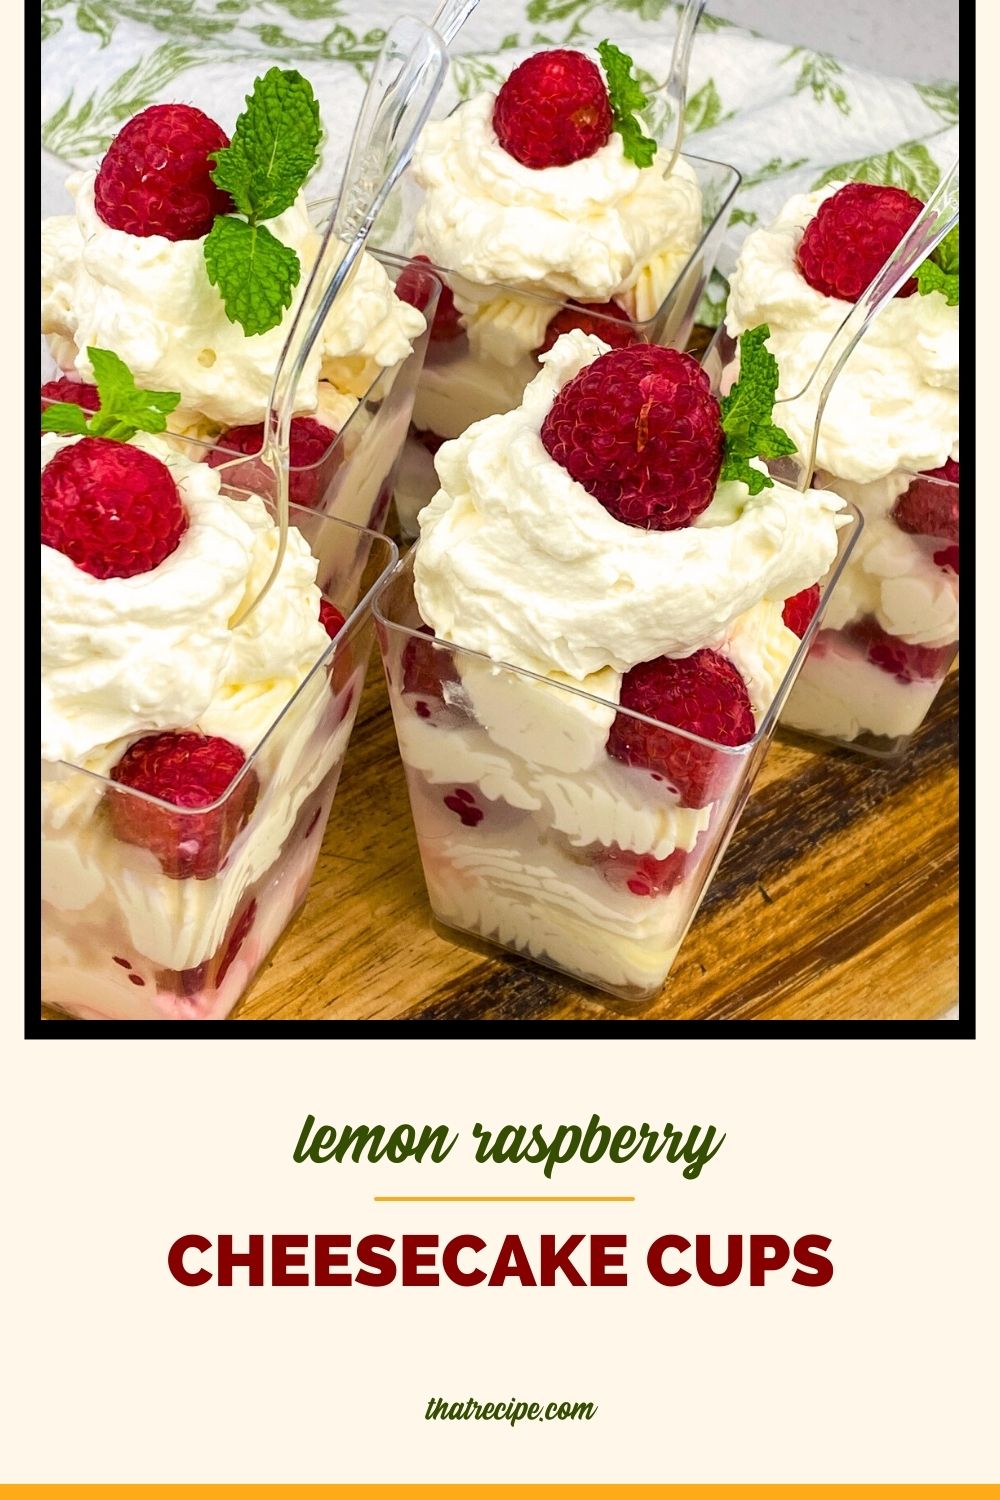 cheesecake cups with text overlay "lemon raspberry cheesecake cups"